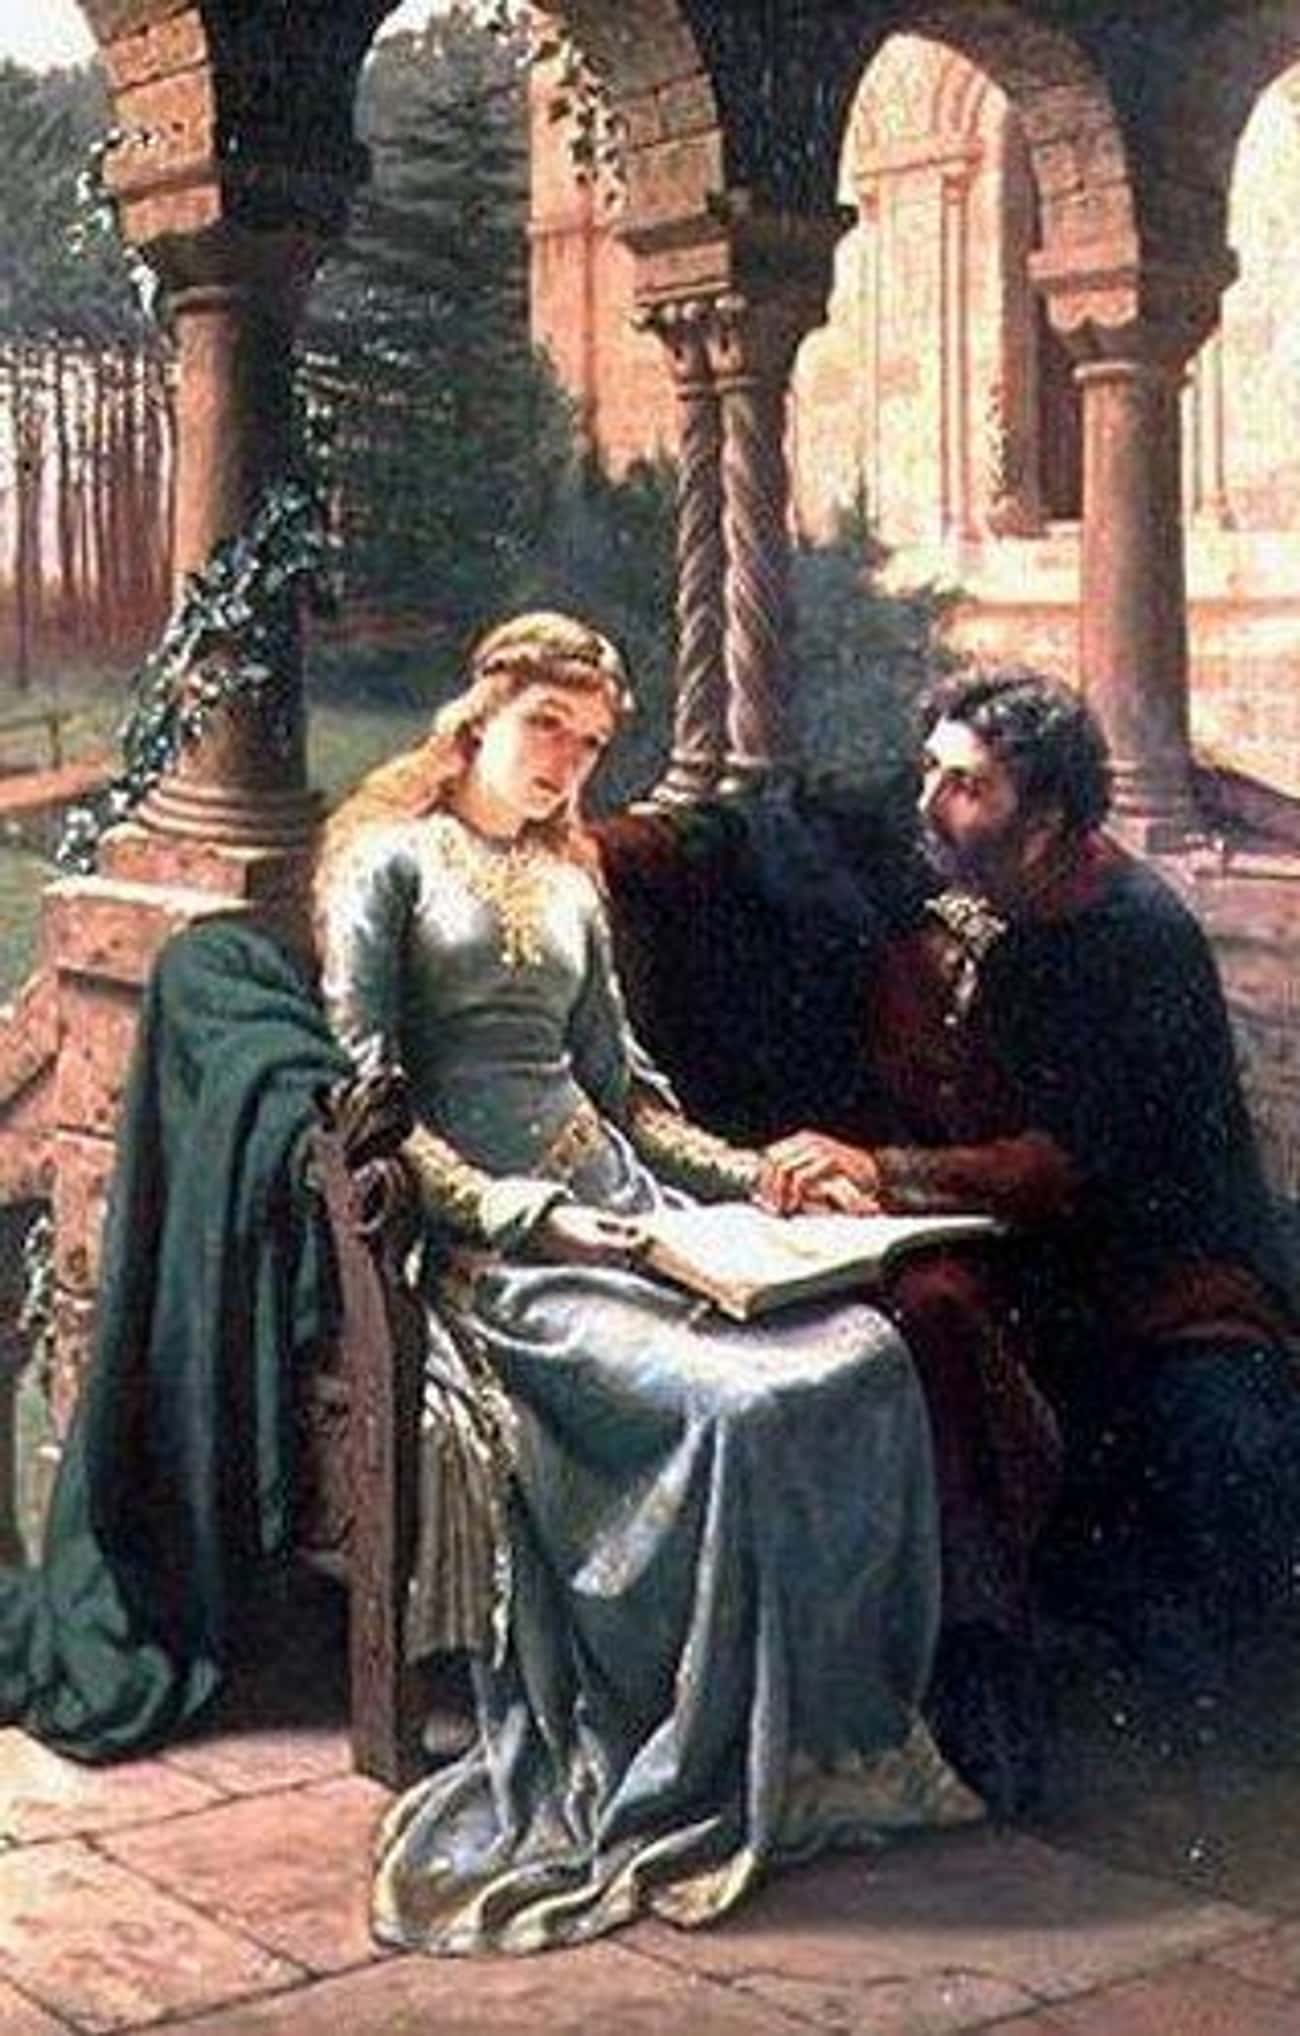 Peter Abelard Lived One Of The Great Medieval Love Stories - And Paid A Heavy Price